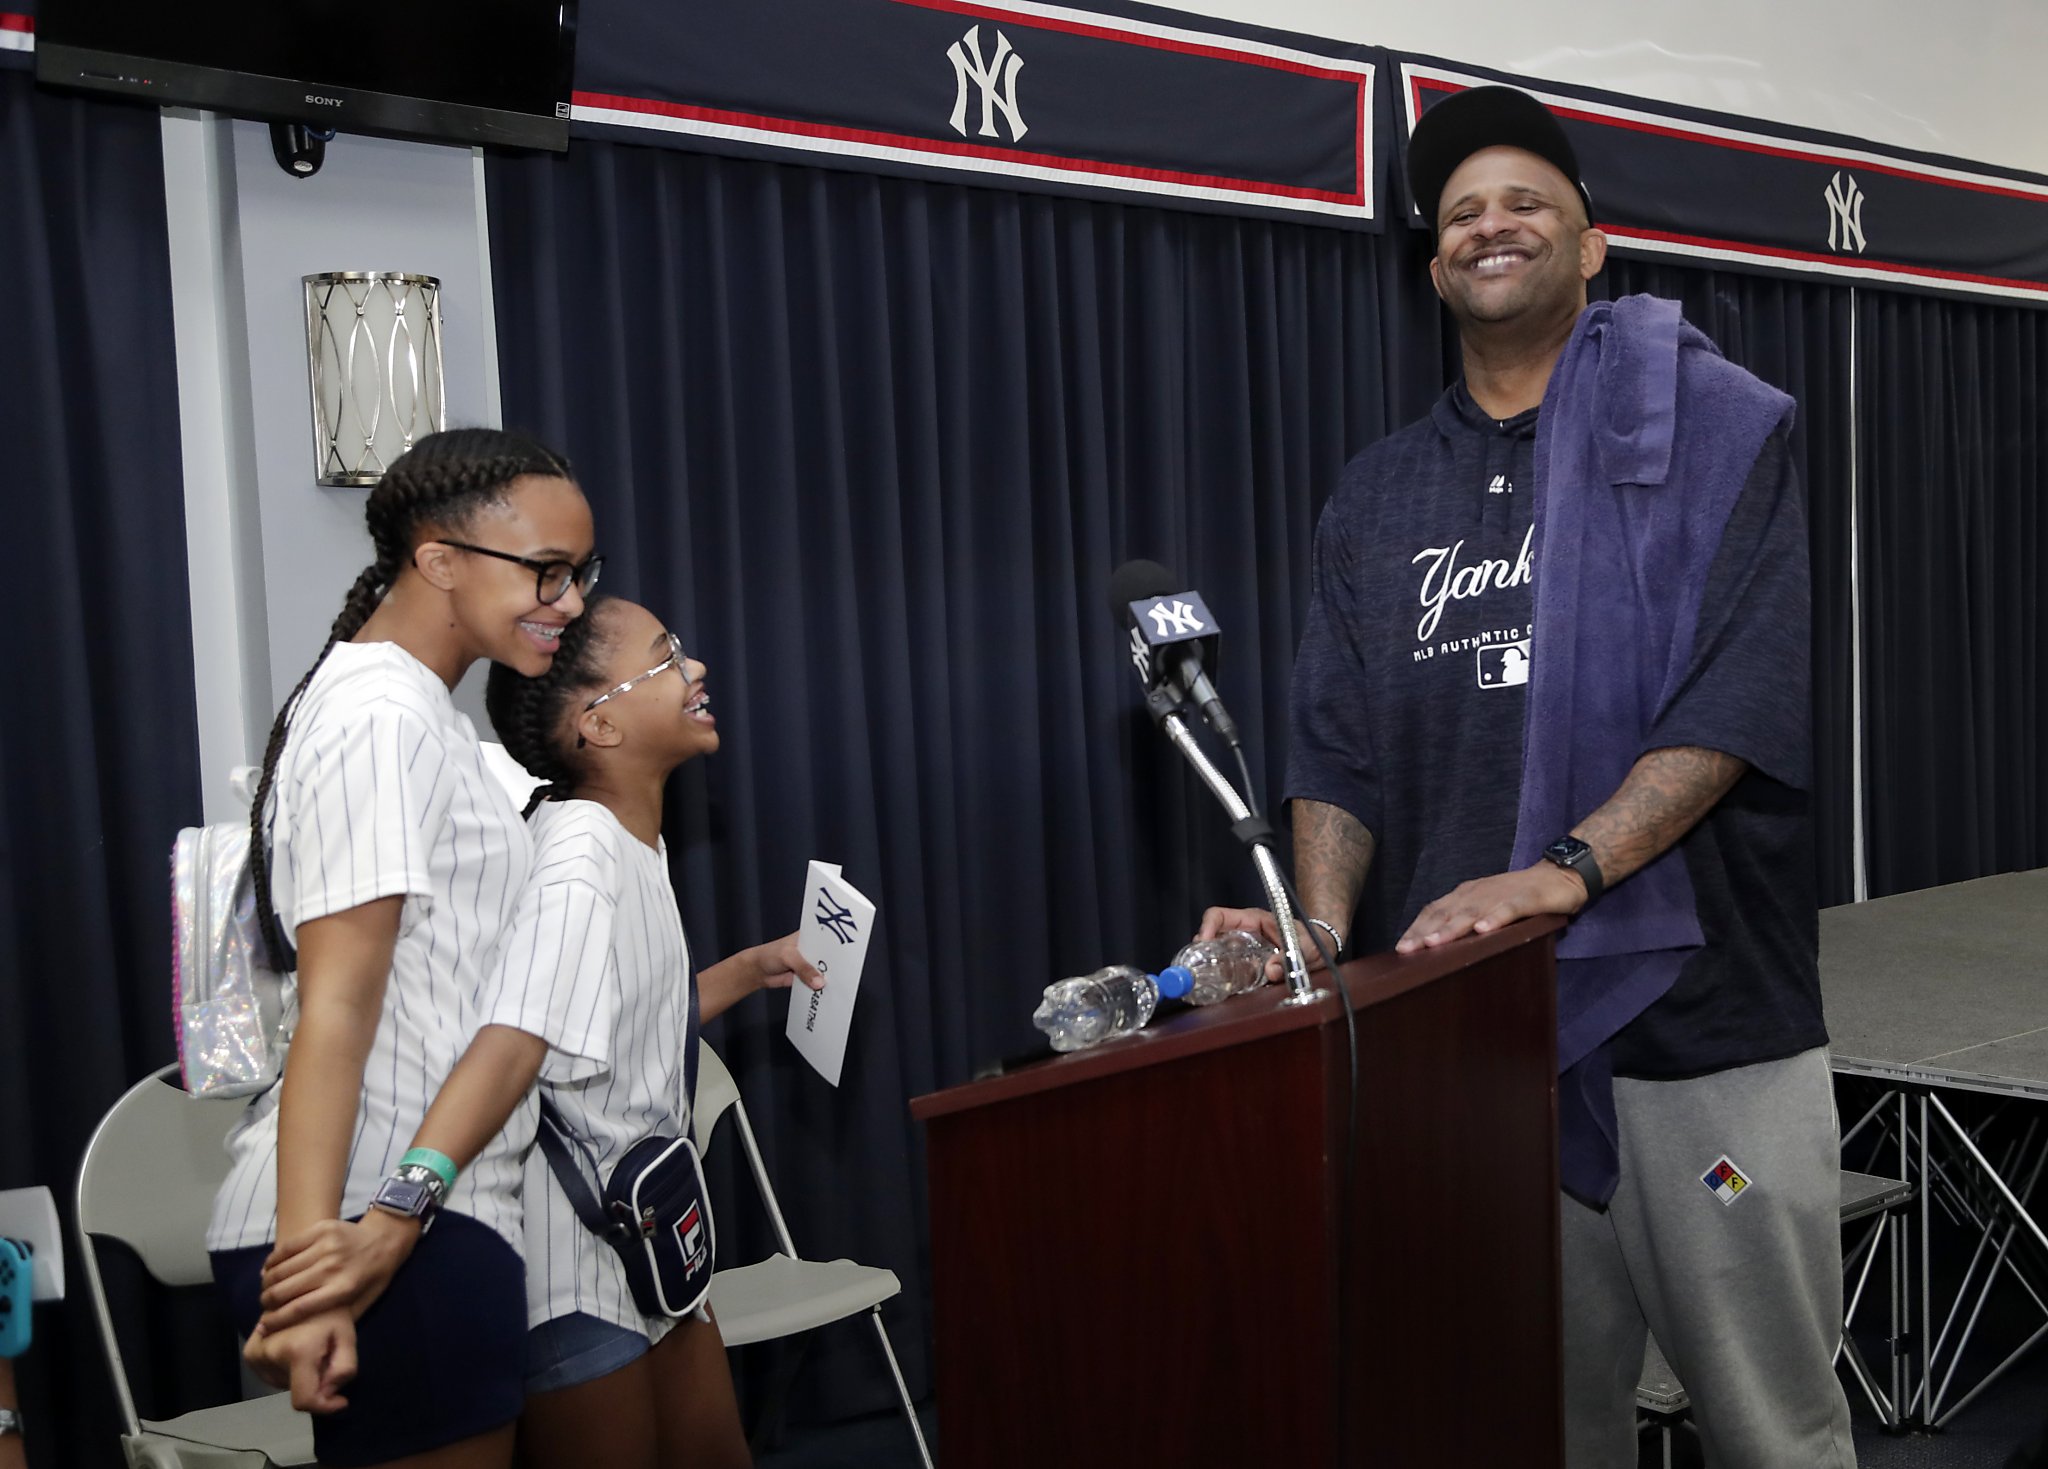 CC Sabathia gets Hall of Fame endorsement from Rickey Henderson